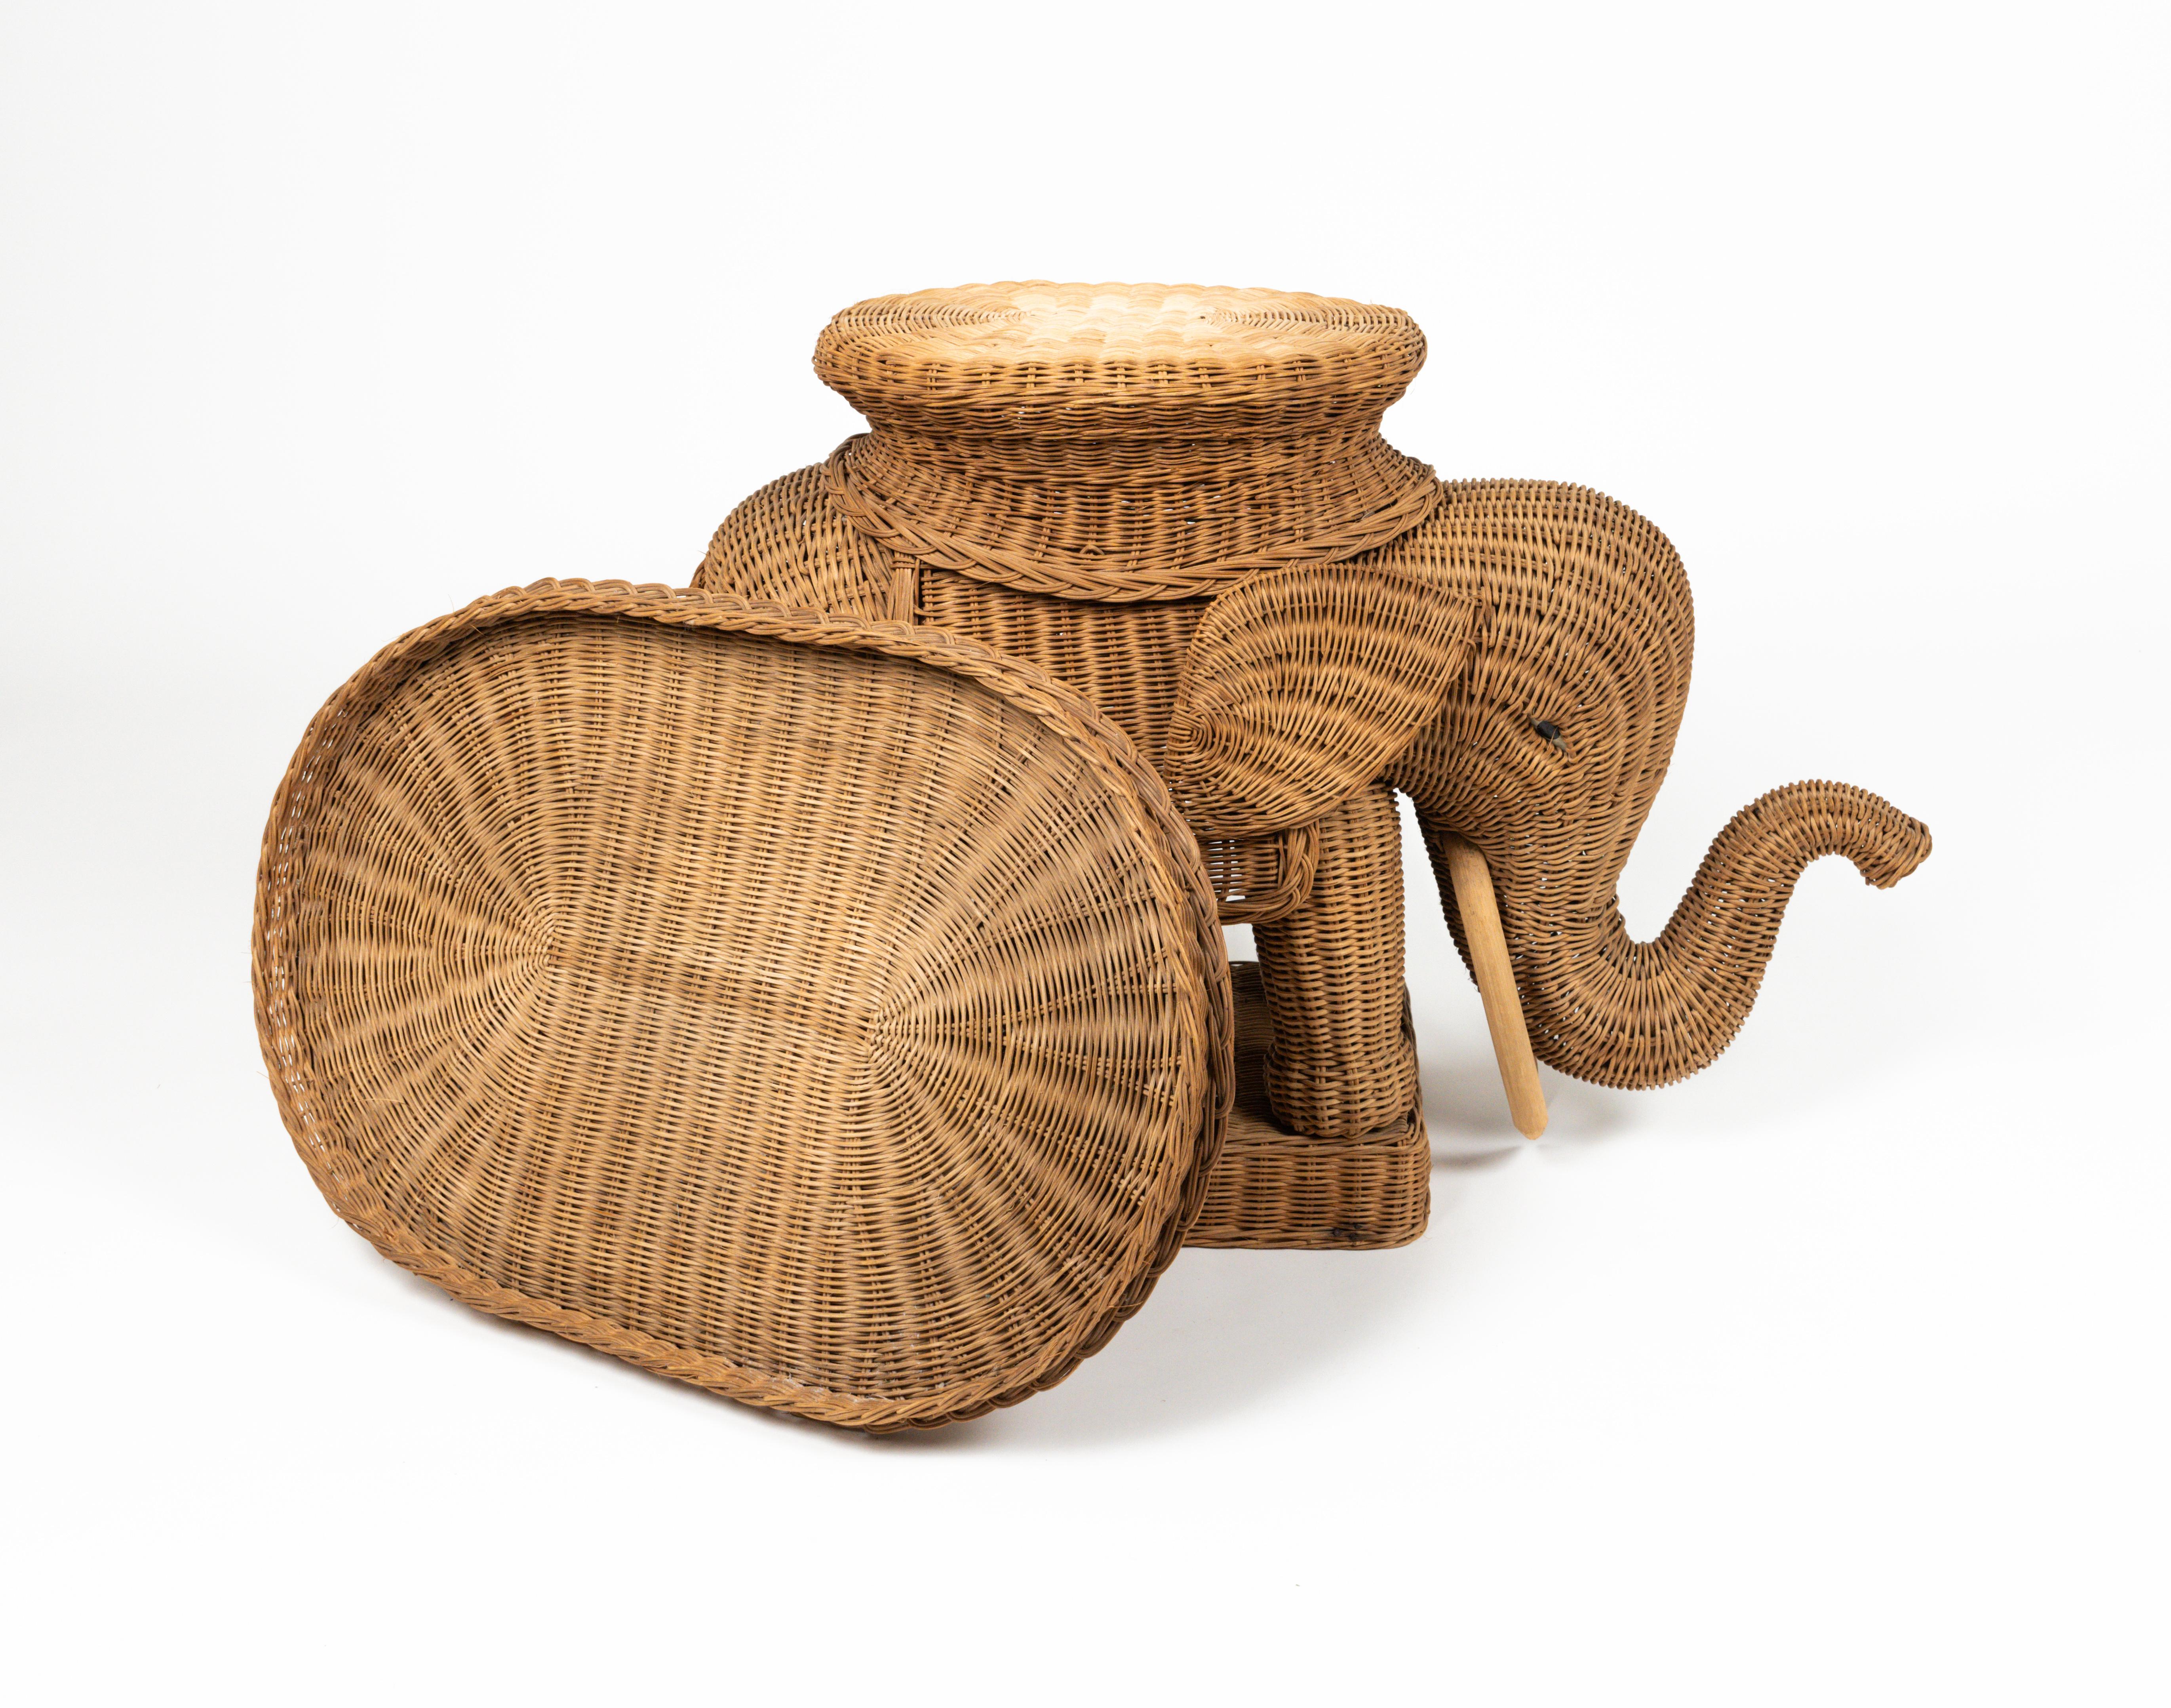 Italian Rattan & Wicker Elephant Side Coffee Table Vivai Del Sud Style, Italy, 1960s For Sale